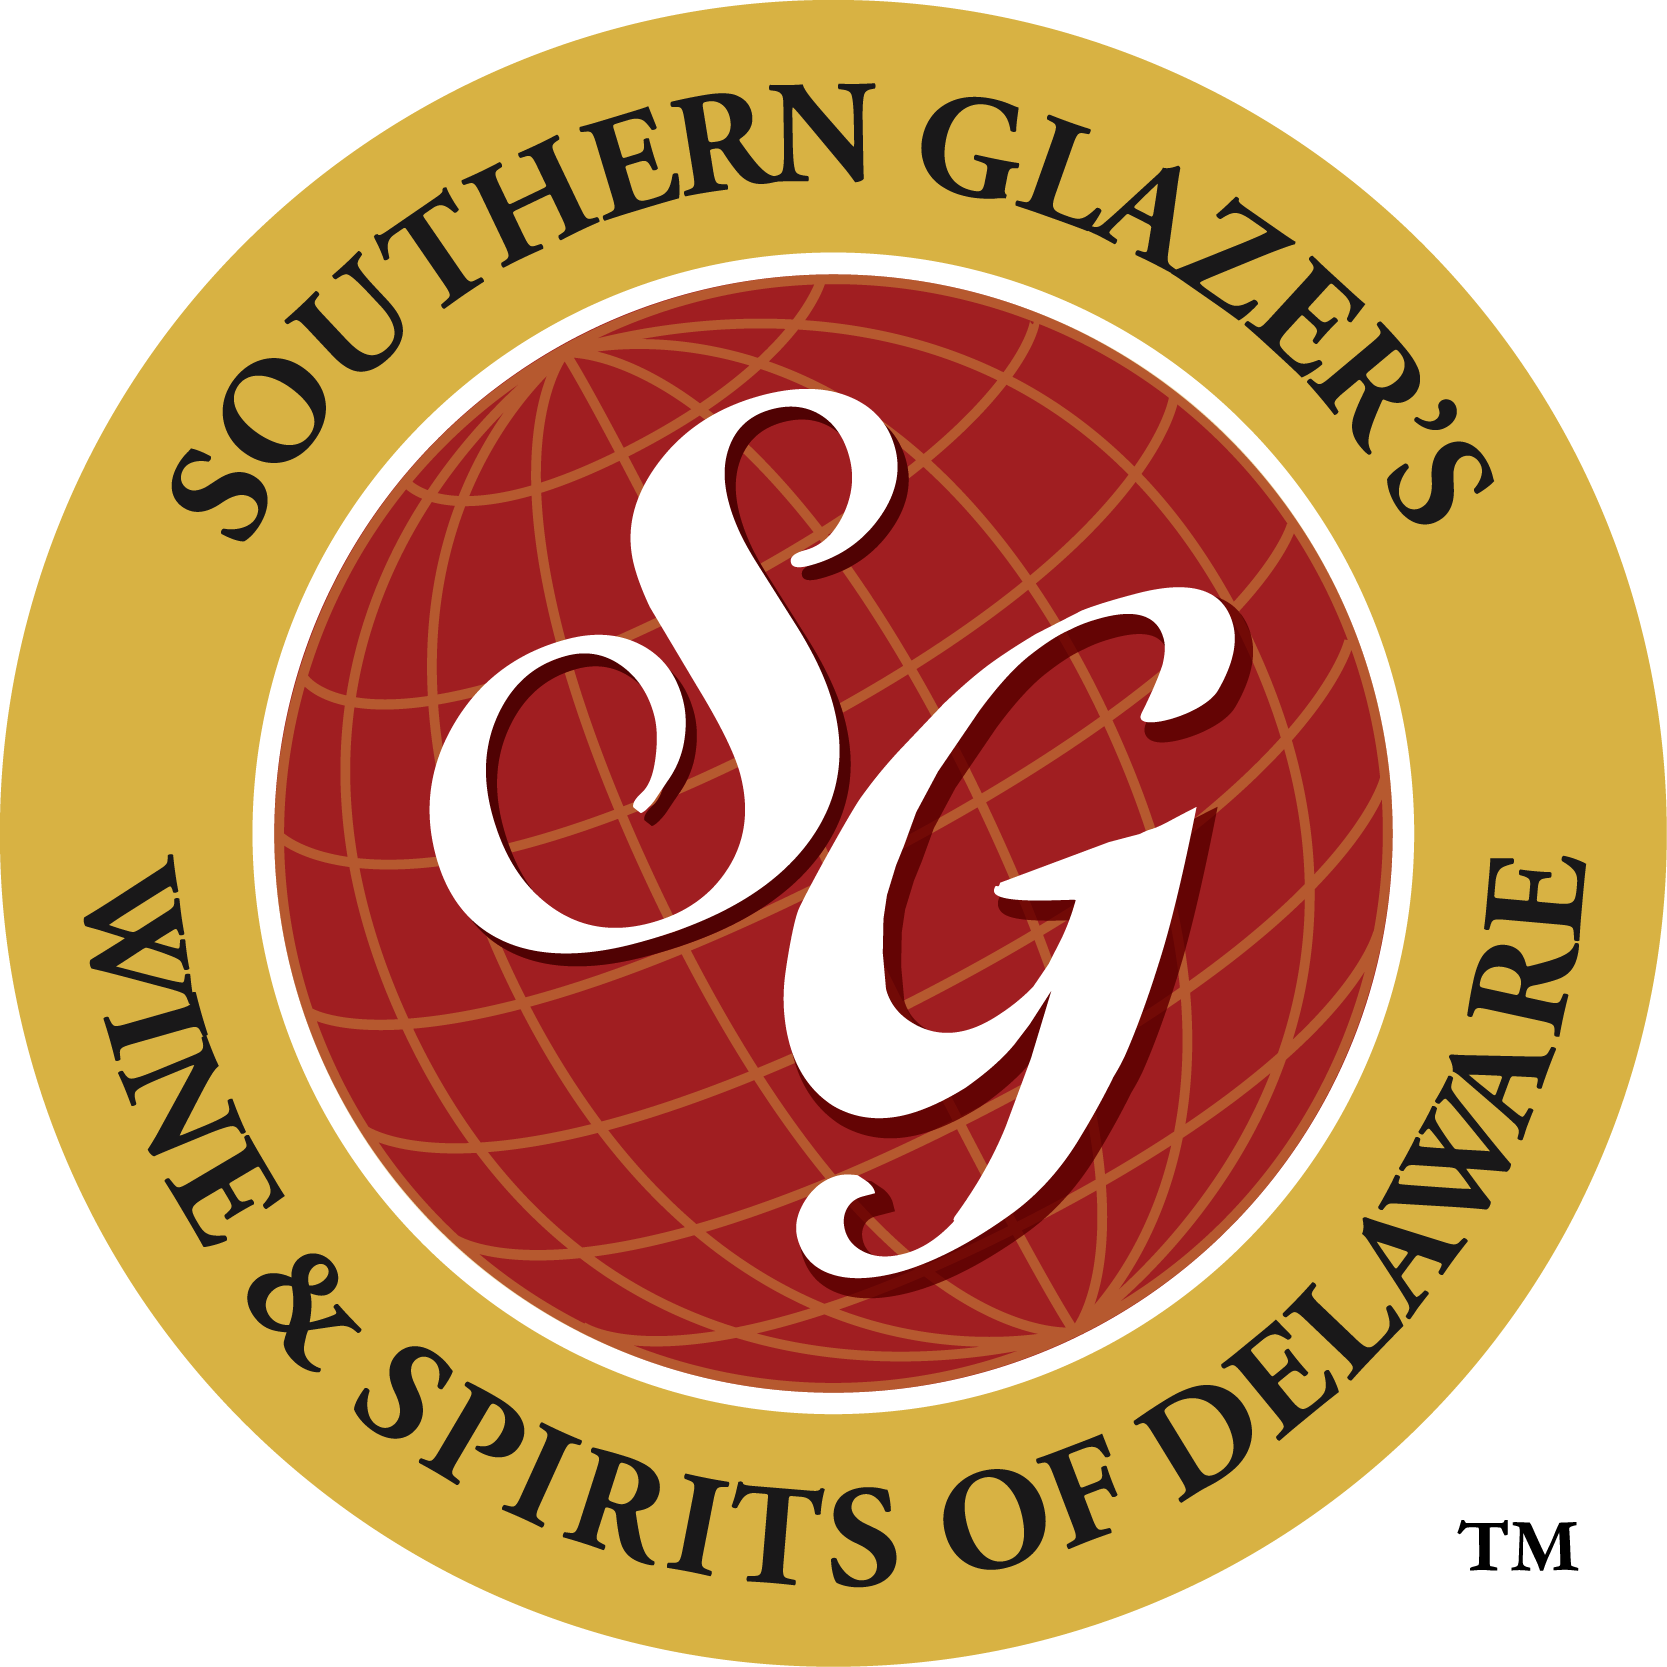 Delaware_Southern Glazers_Seal.png